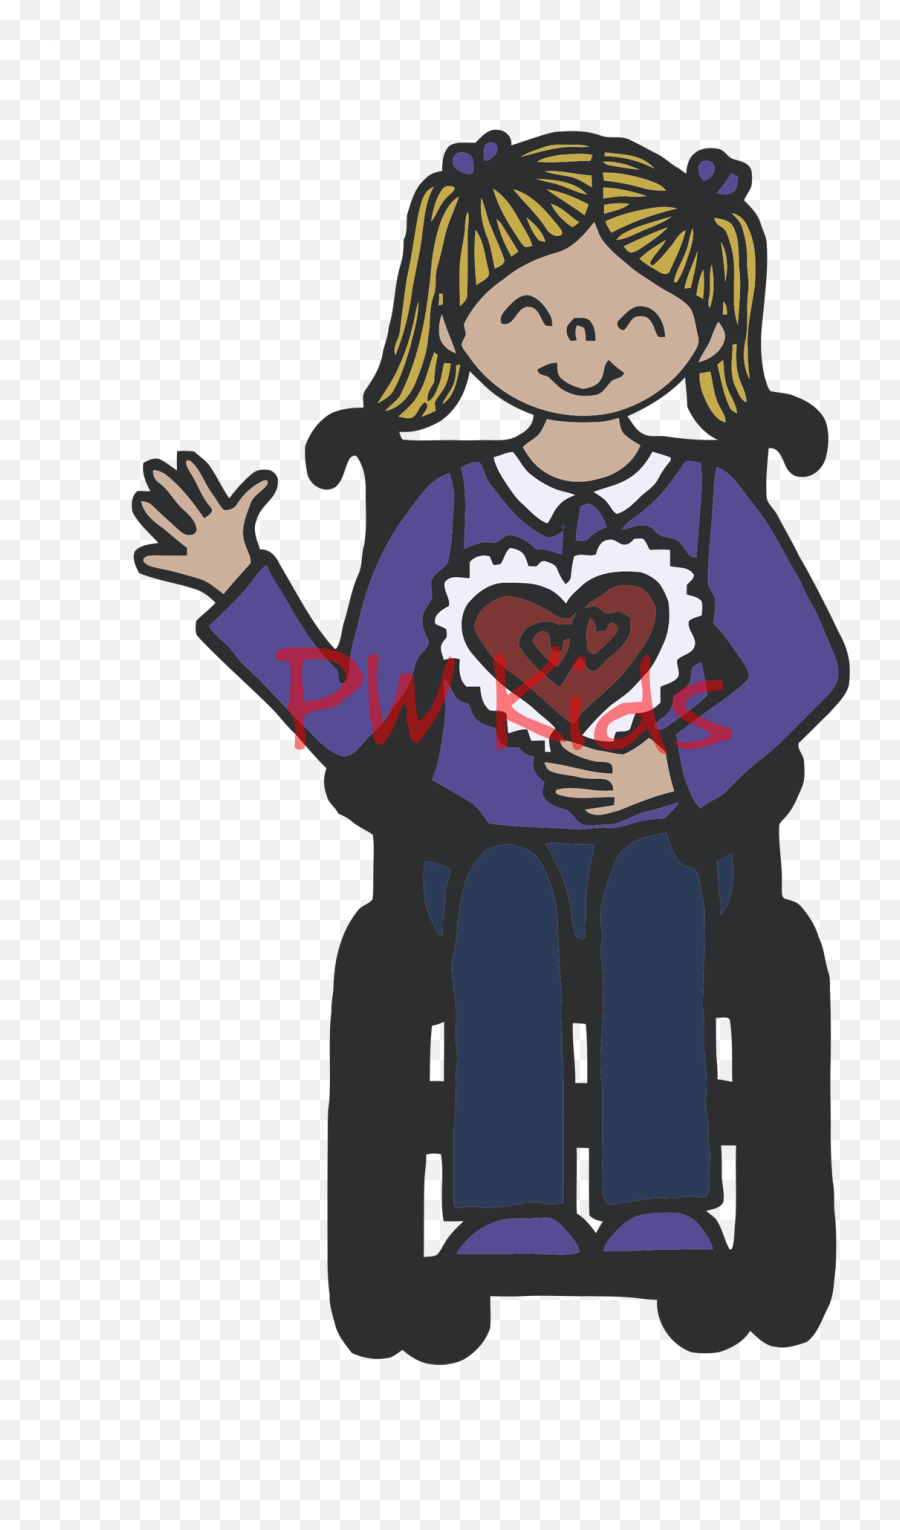 Inclusive Disability Clip Art - Girl With Cerebral Palsy Cartoon Emoji,Disability Clipart